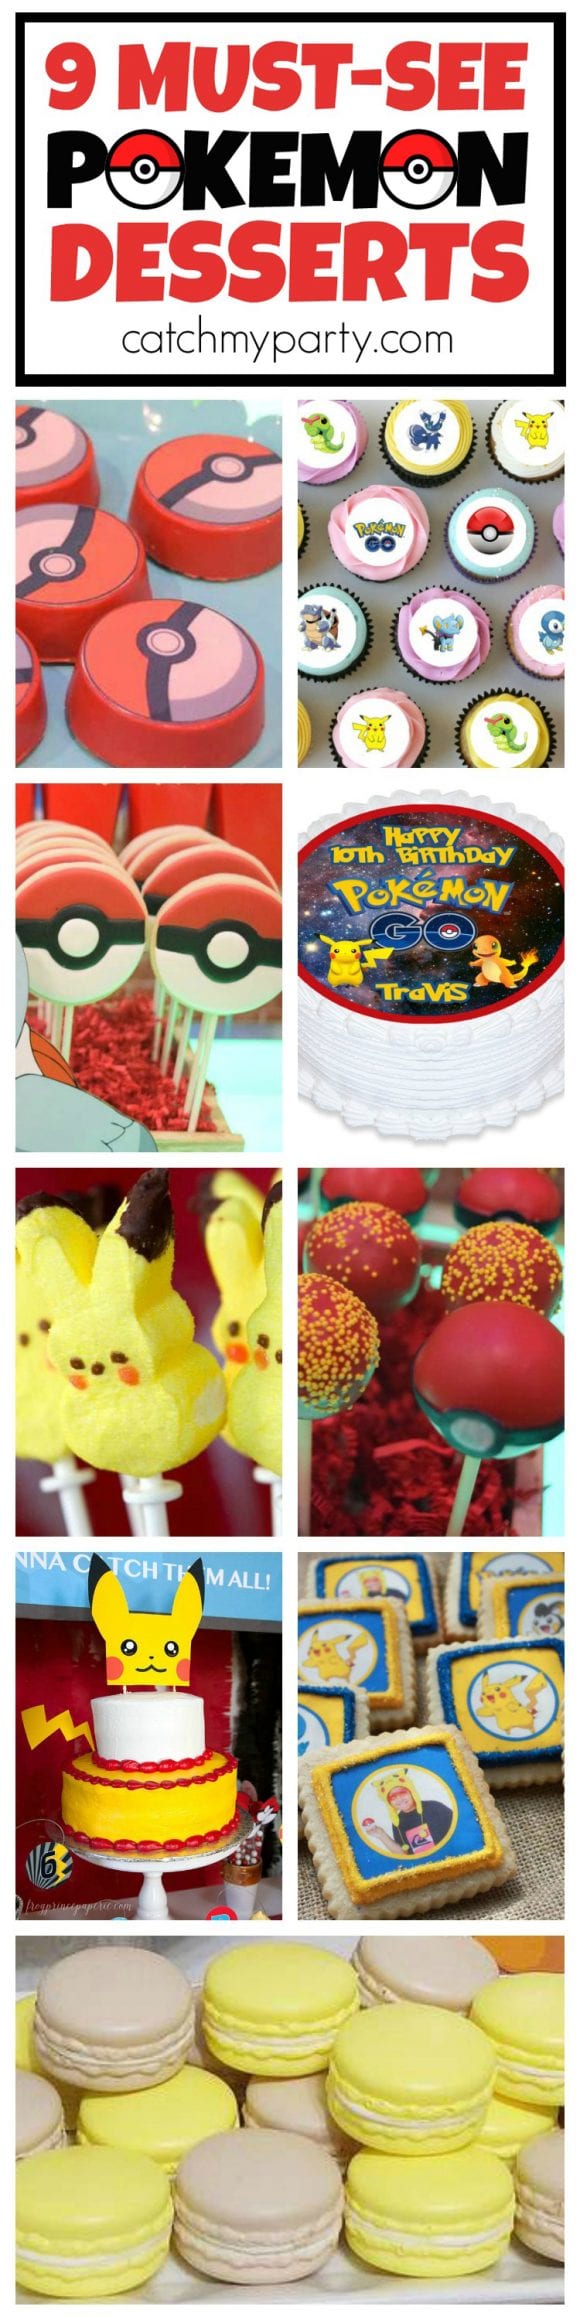 9 Must-See Pokemon Desserts | CatchMyParty.com